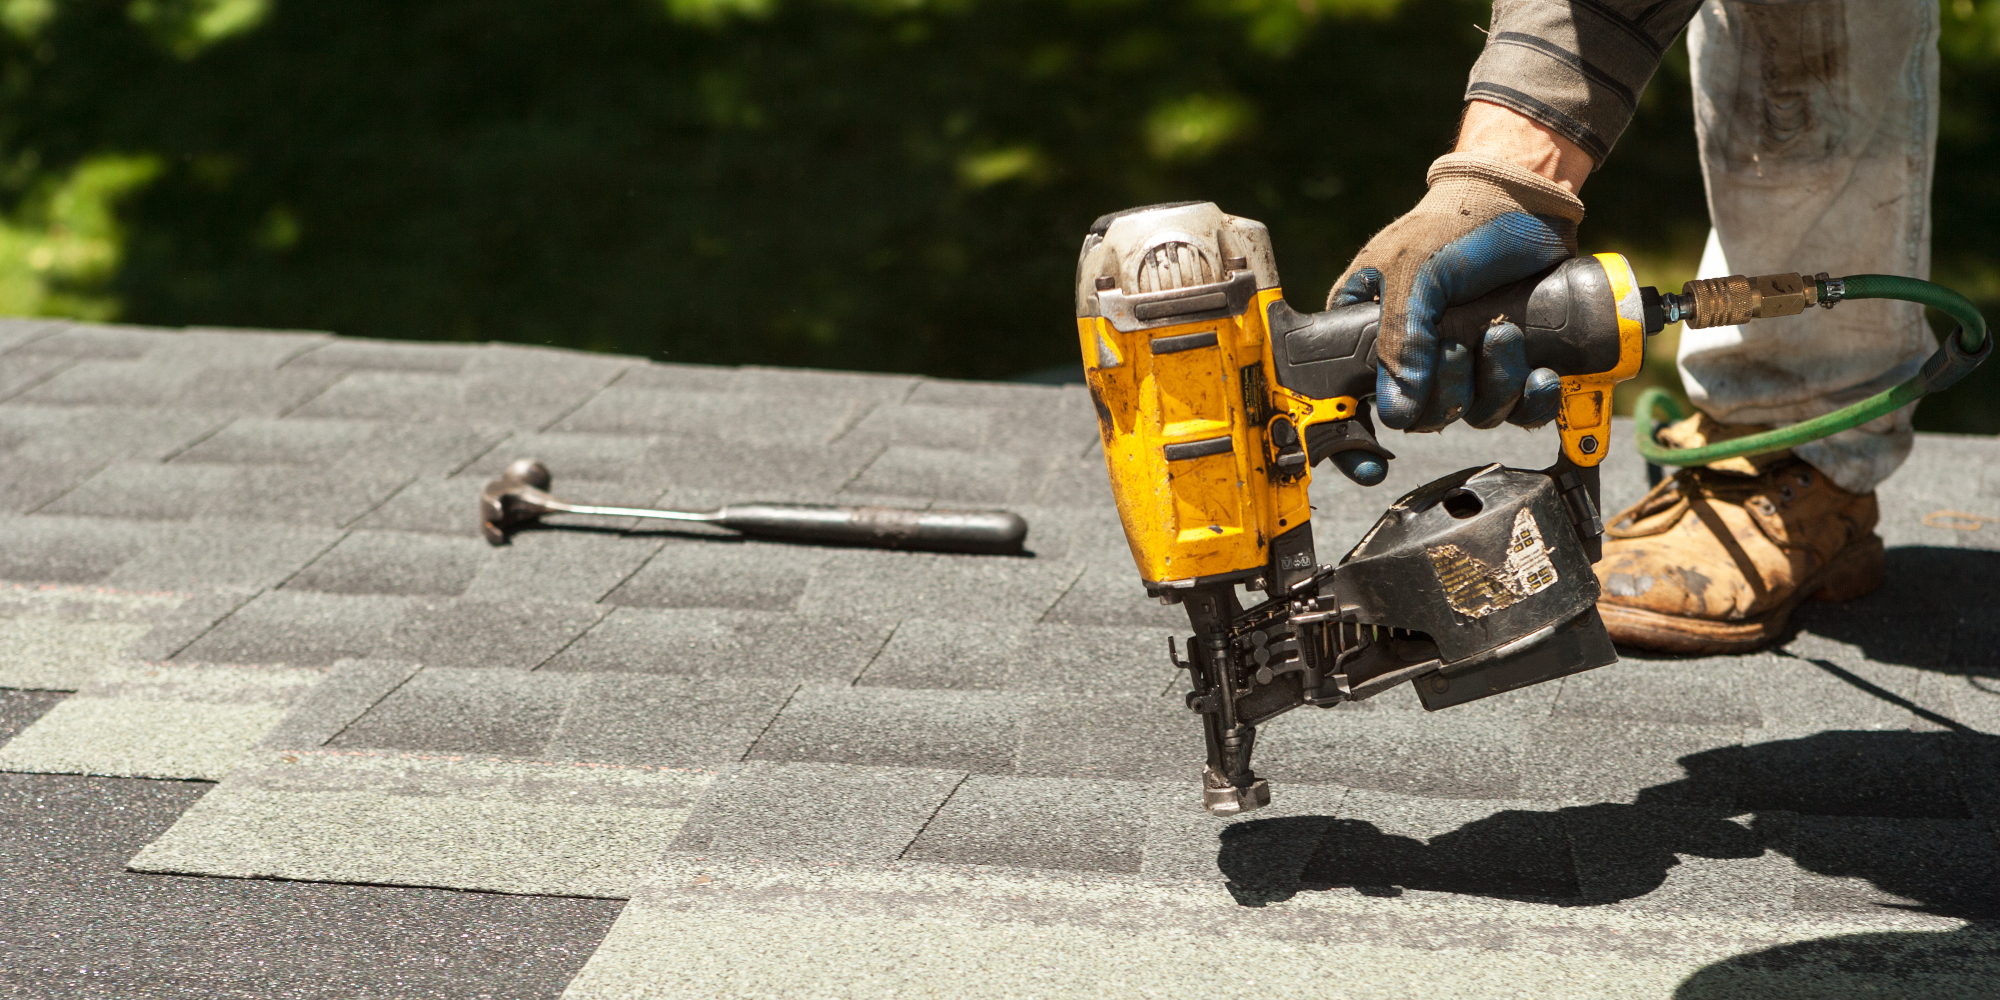 Residential roofing contractors serving Cape Cod, South Coast, & South Shore MA